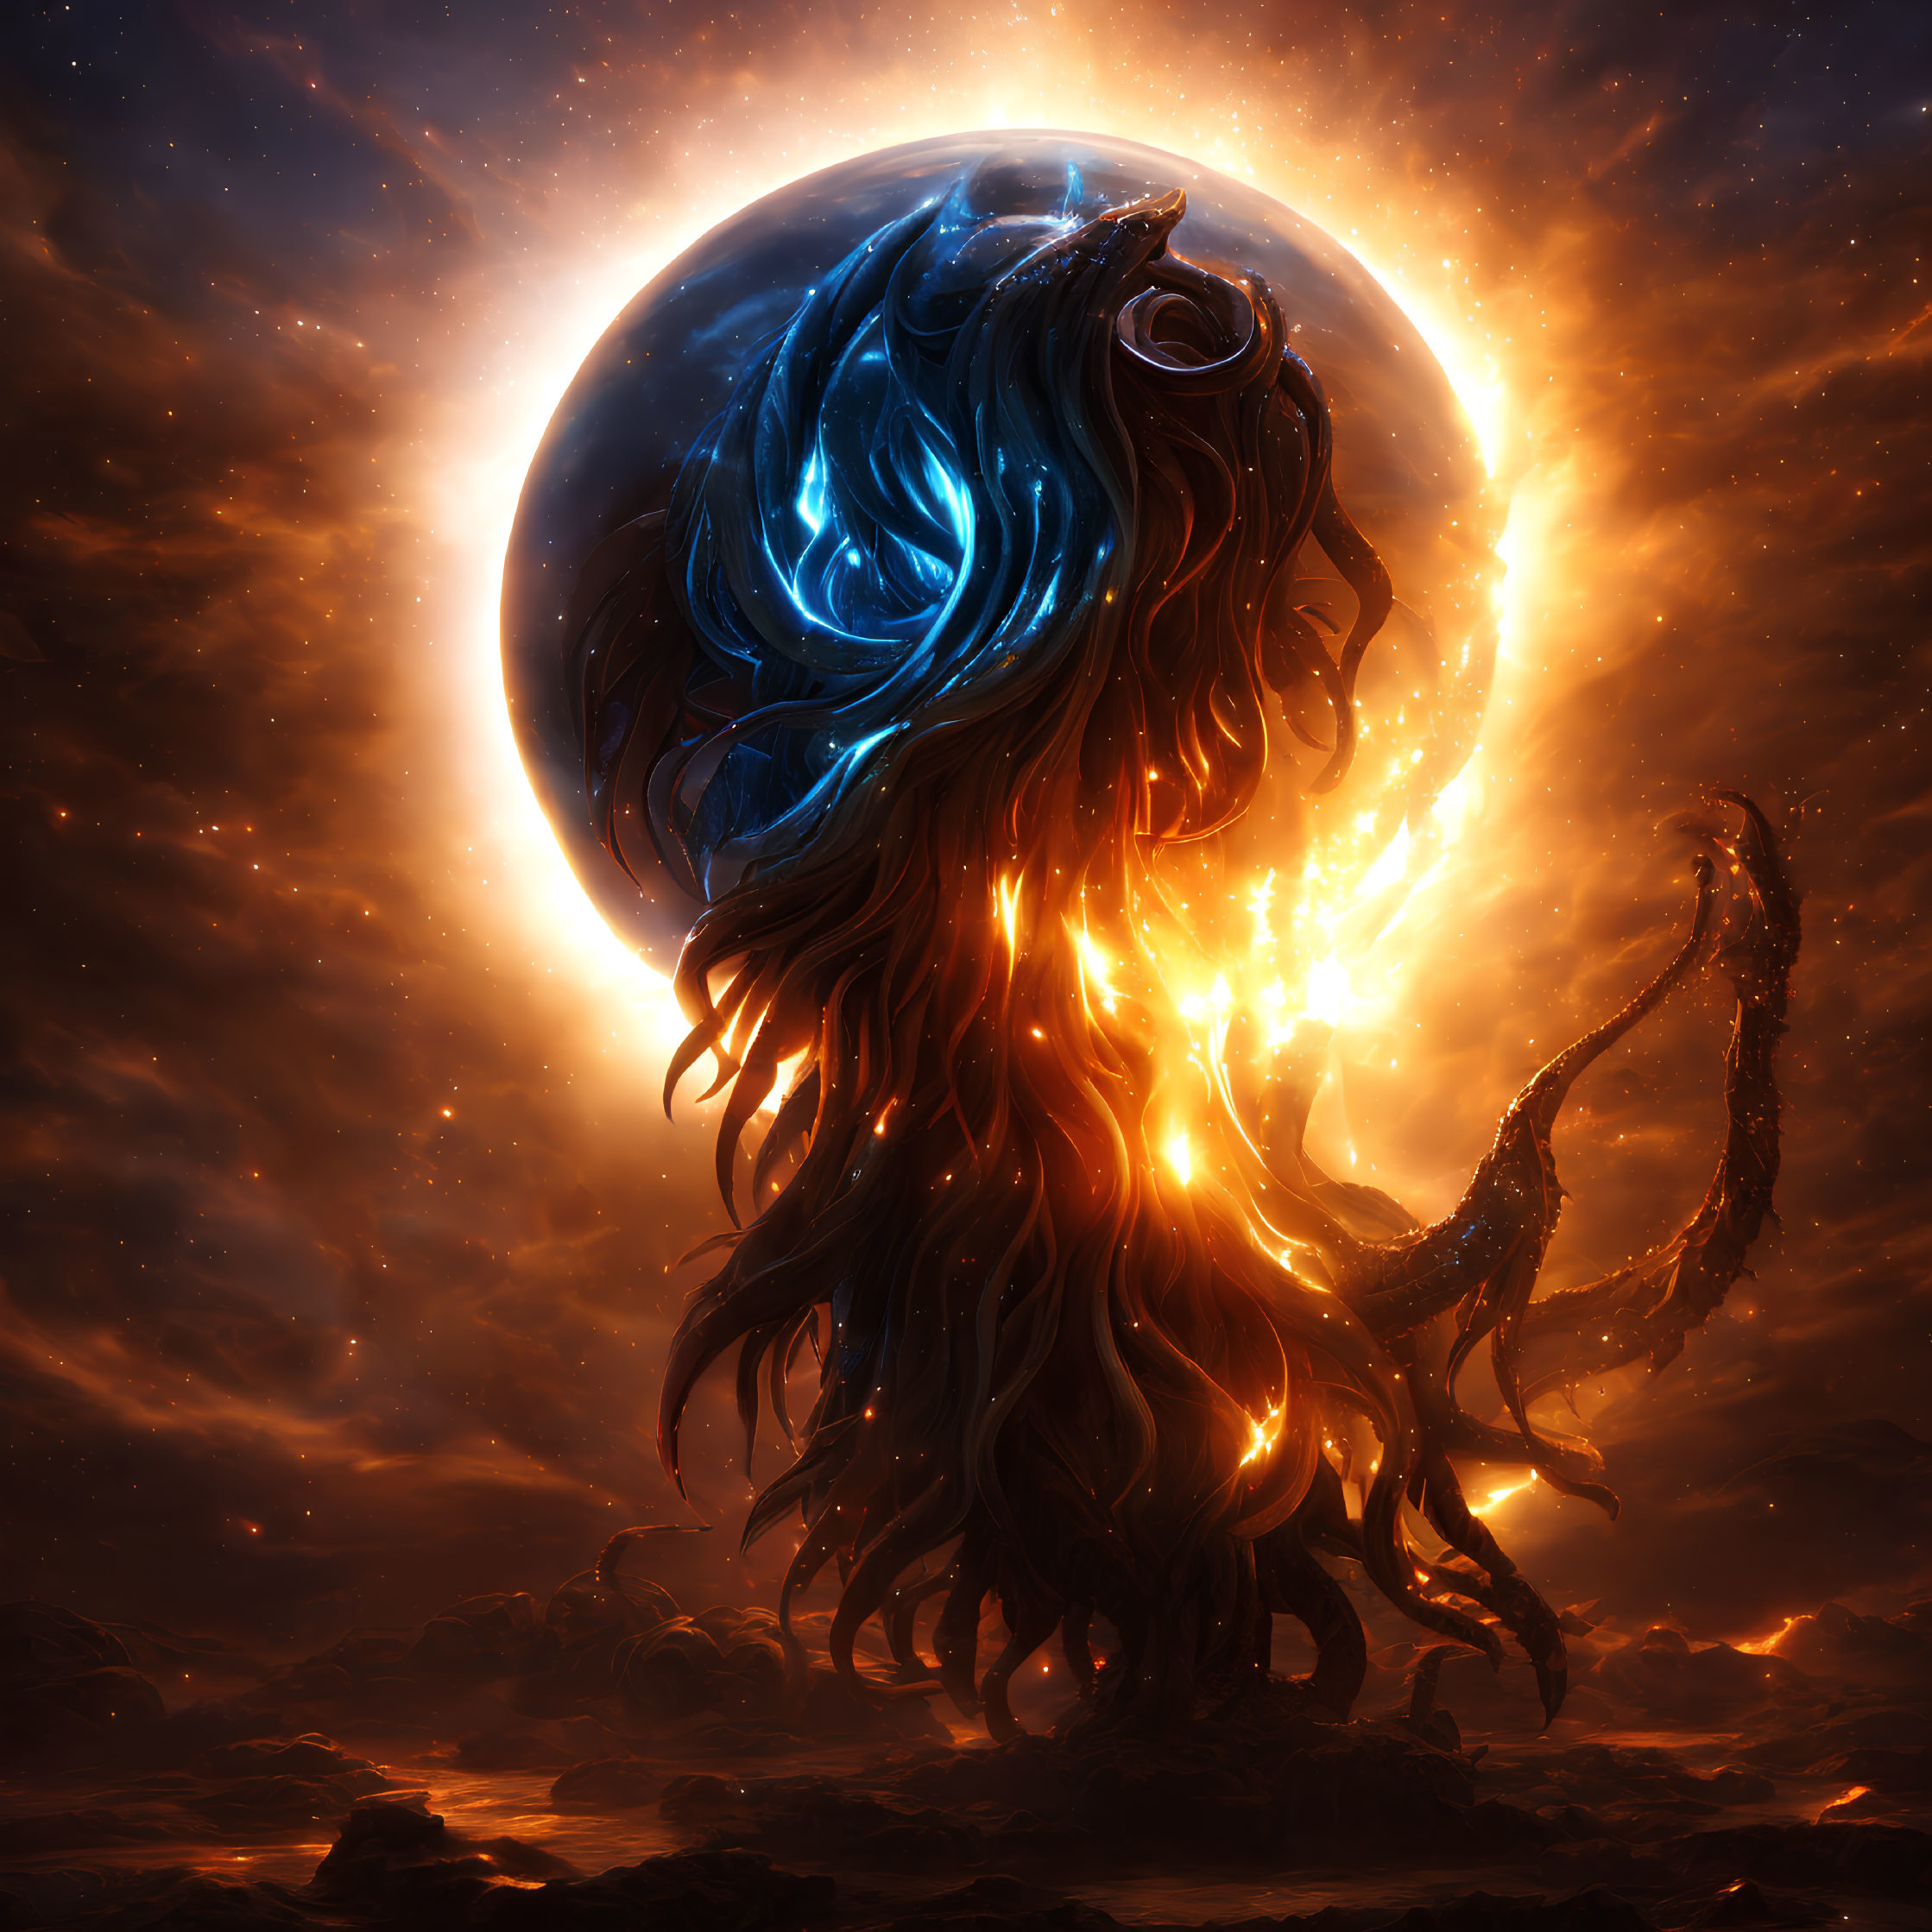 Fantastical fiery creature with luminescent tendrils against celestial backdrop